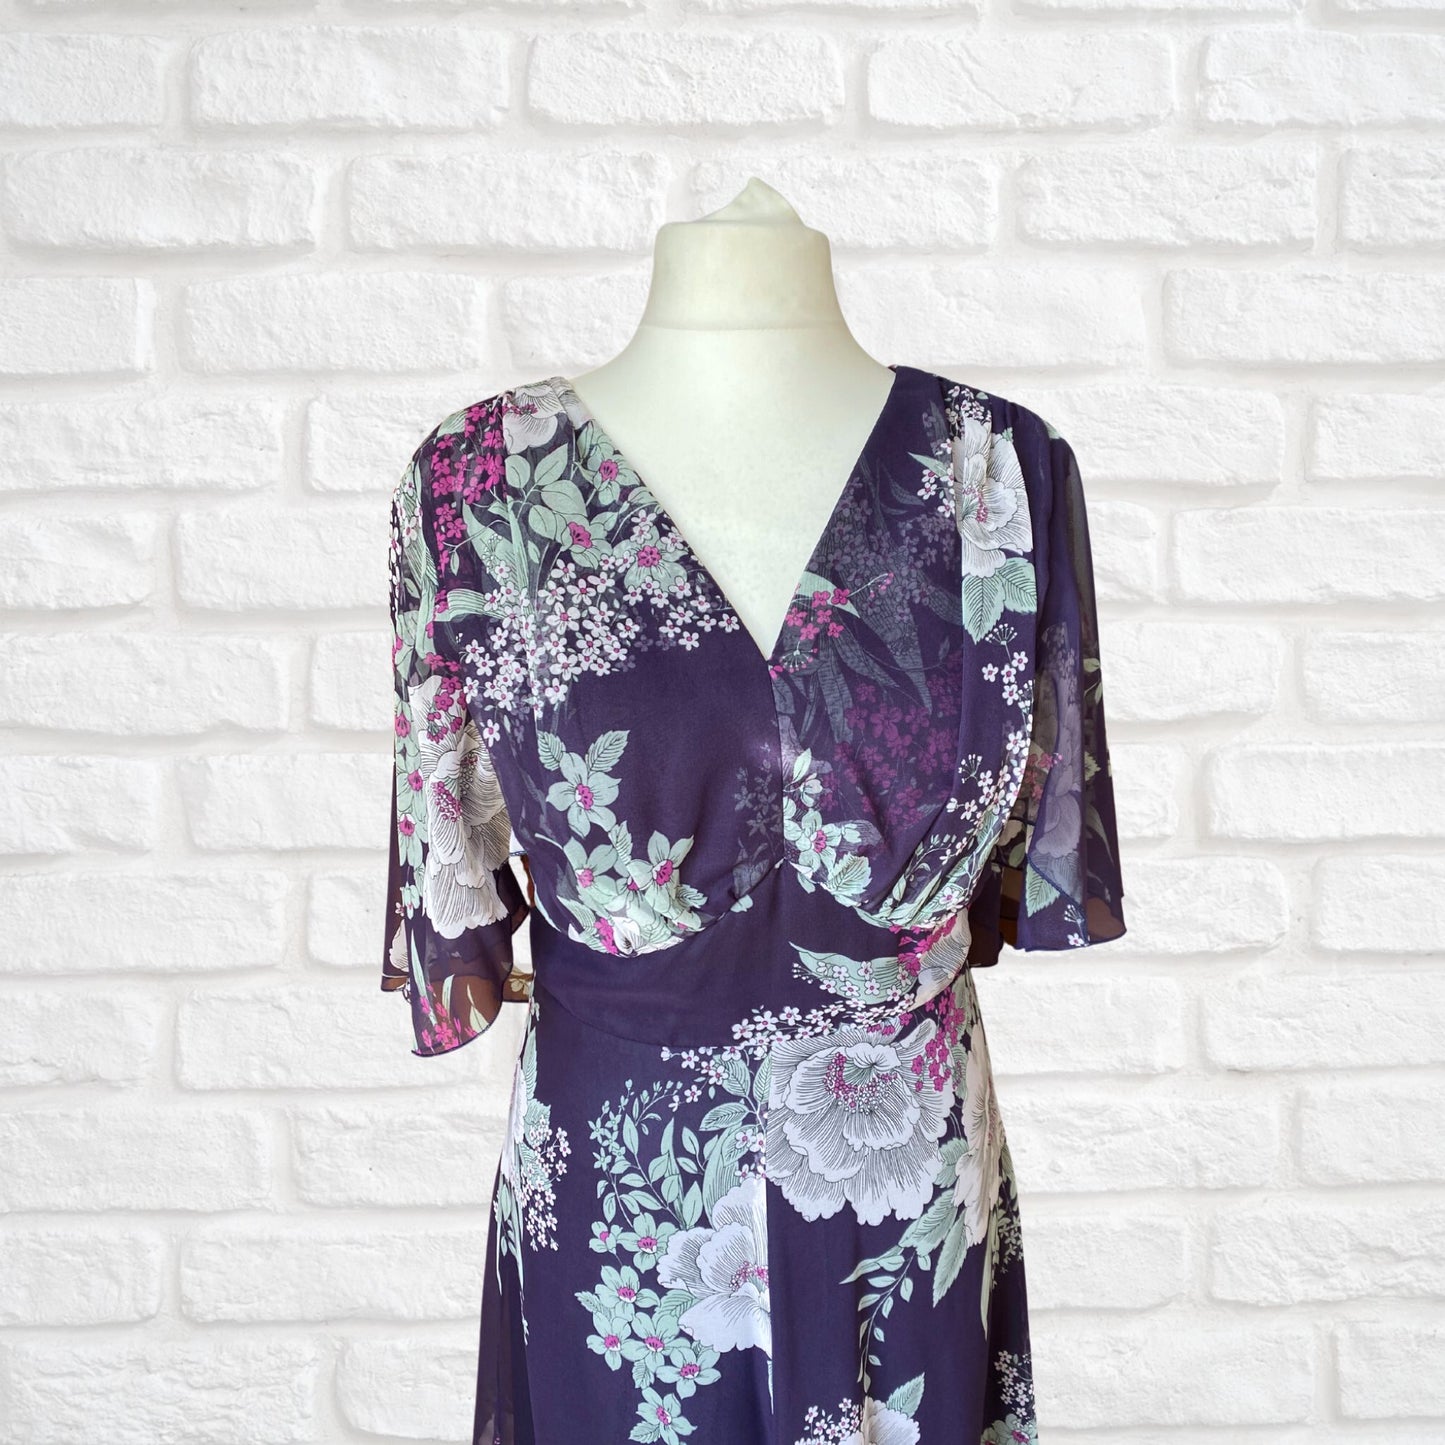 70s purple floral maxi dress with short angel sleeves. Approx UK size 14